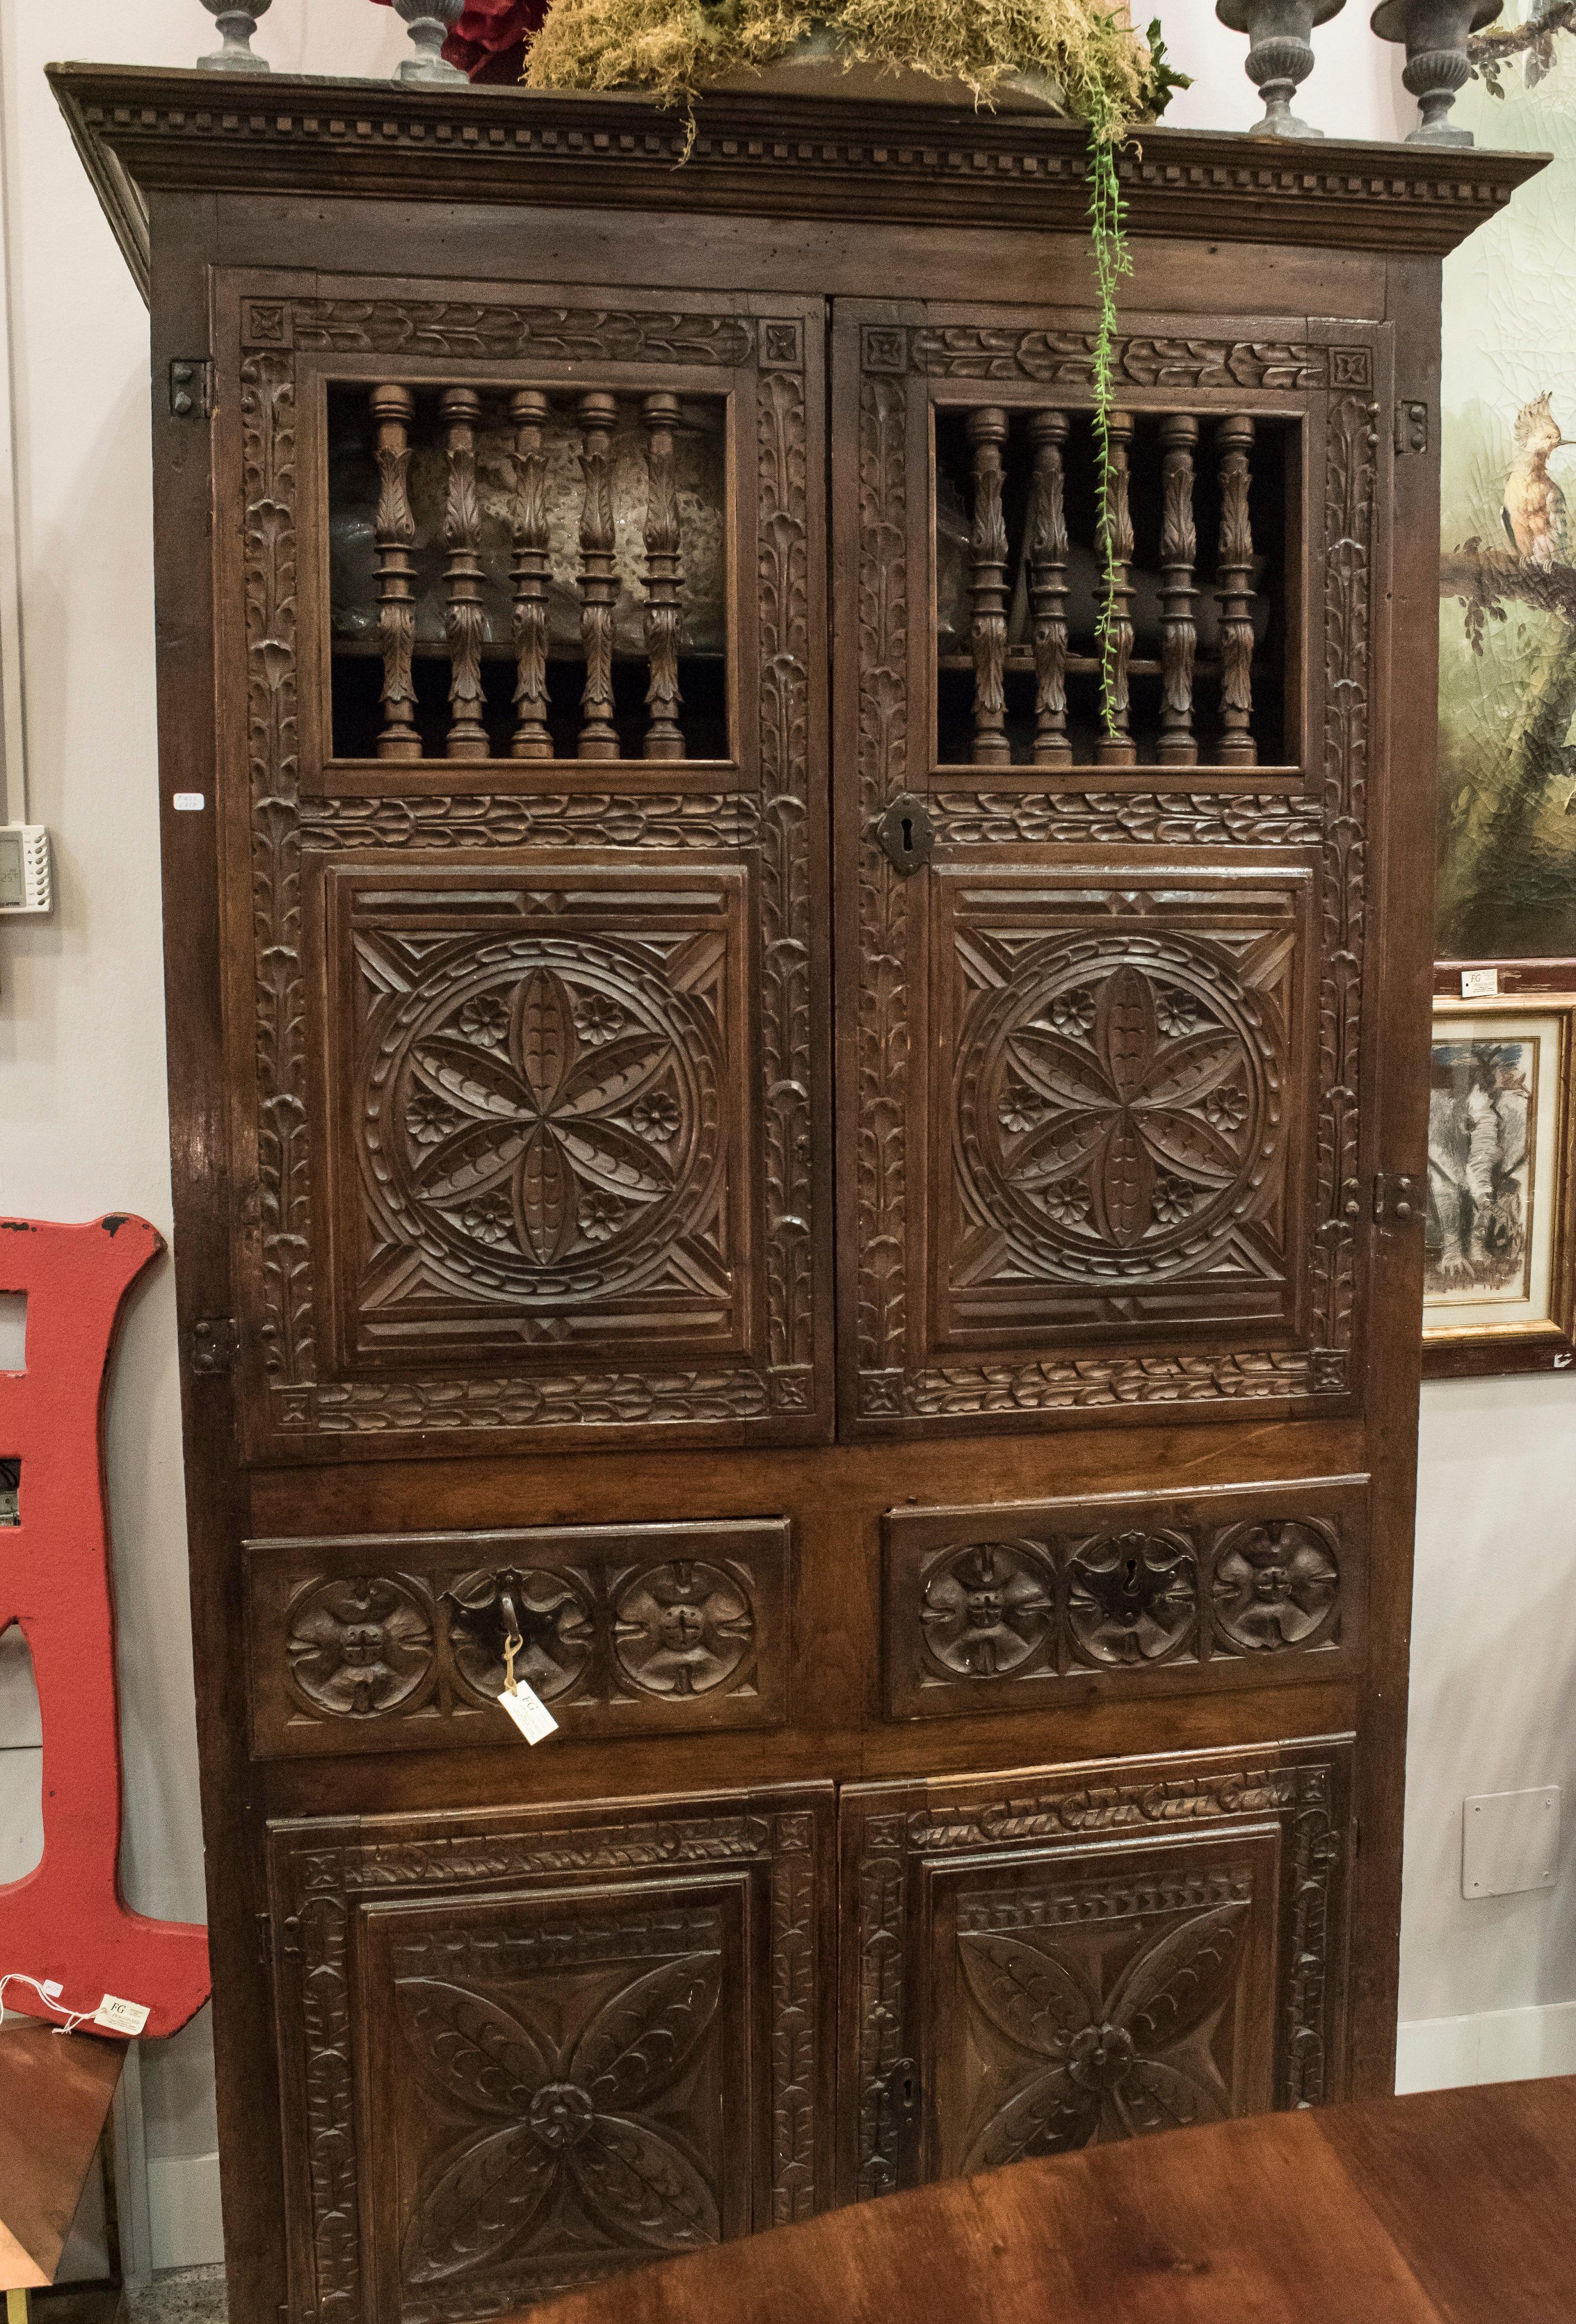 Amazing carved walnut buffet with key rings, handles in wrought iron. Celosia in the upper part.
Drawers in the interior and in the middle. Upper and lower doors. Toothed cornice.
One of a kind carved walnut S XVII buffet from the north of Spain (